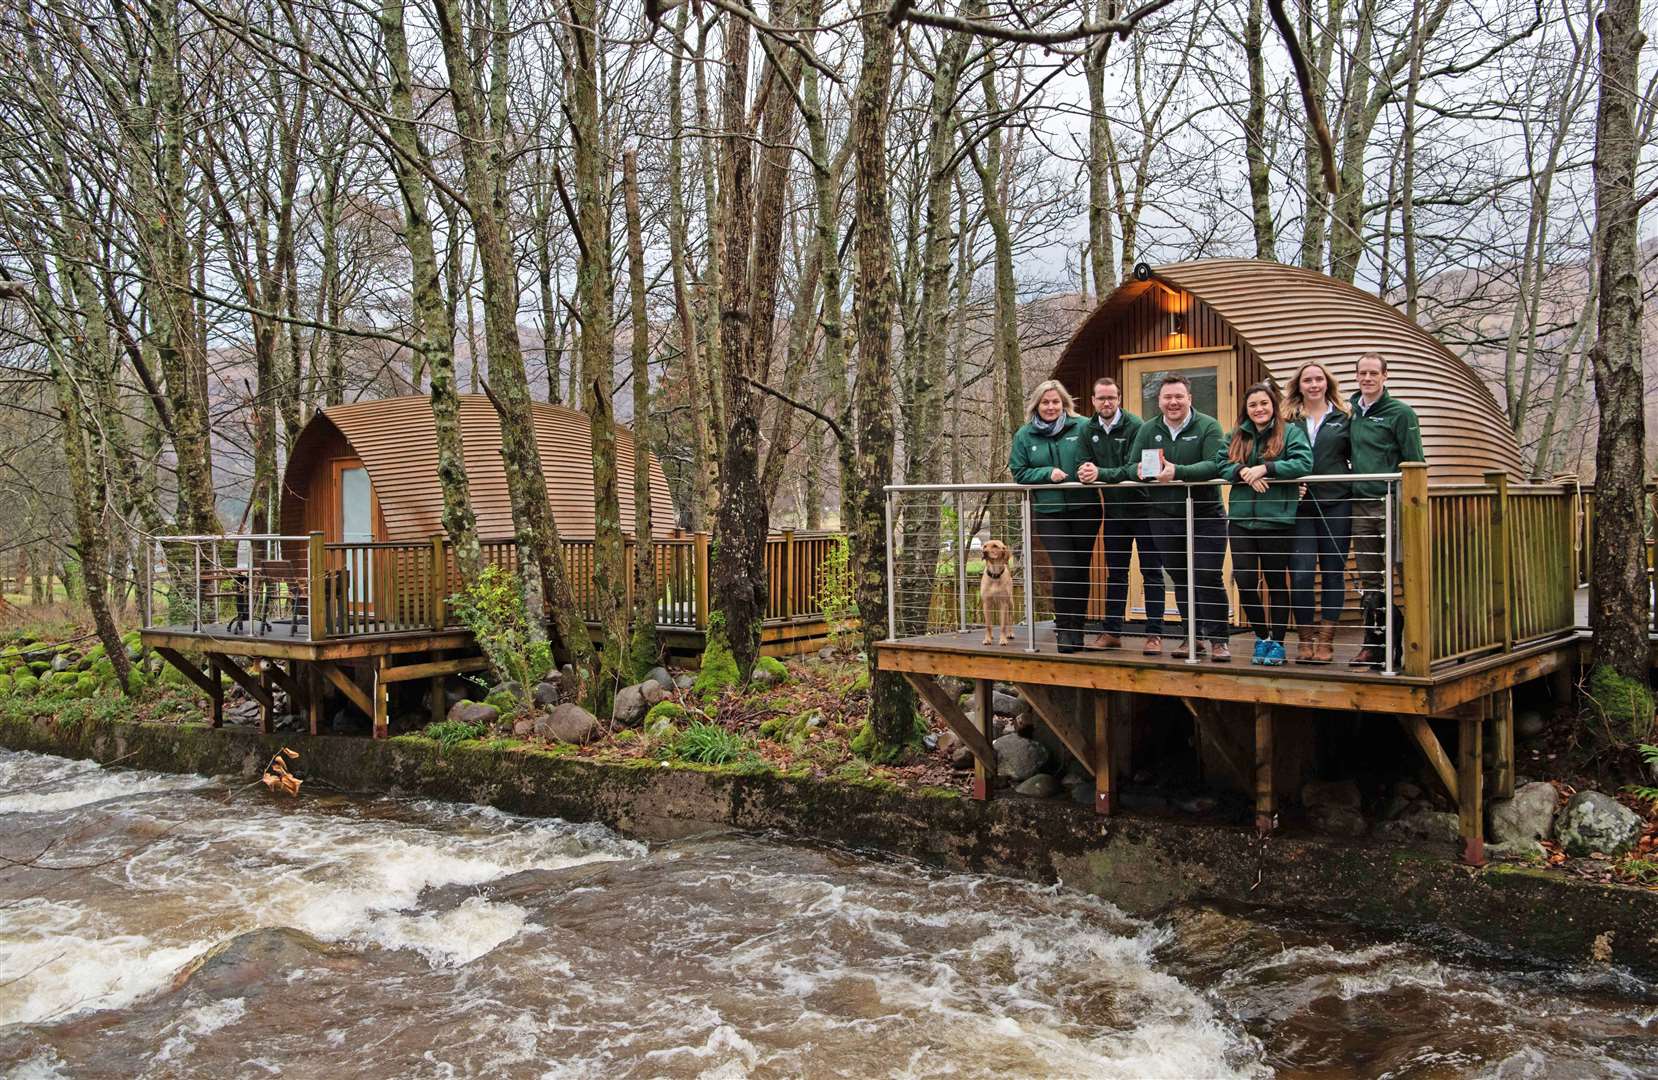 The family-run venture Woodlands Glencoe landed the accolade of UK Small Business of the Year in the annual Celebrating Small Business Awards run by the FSB.